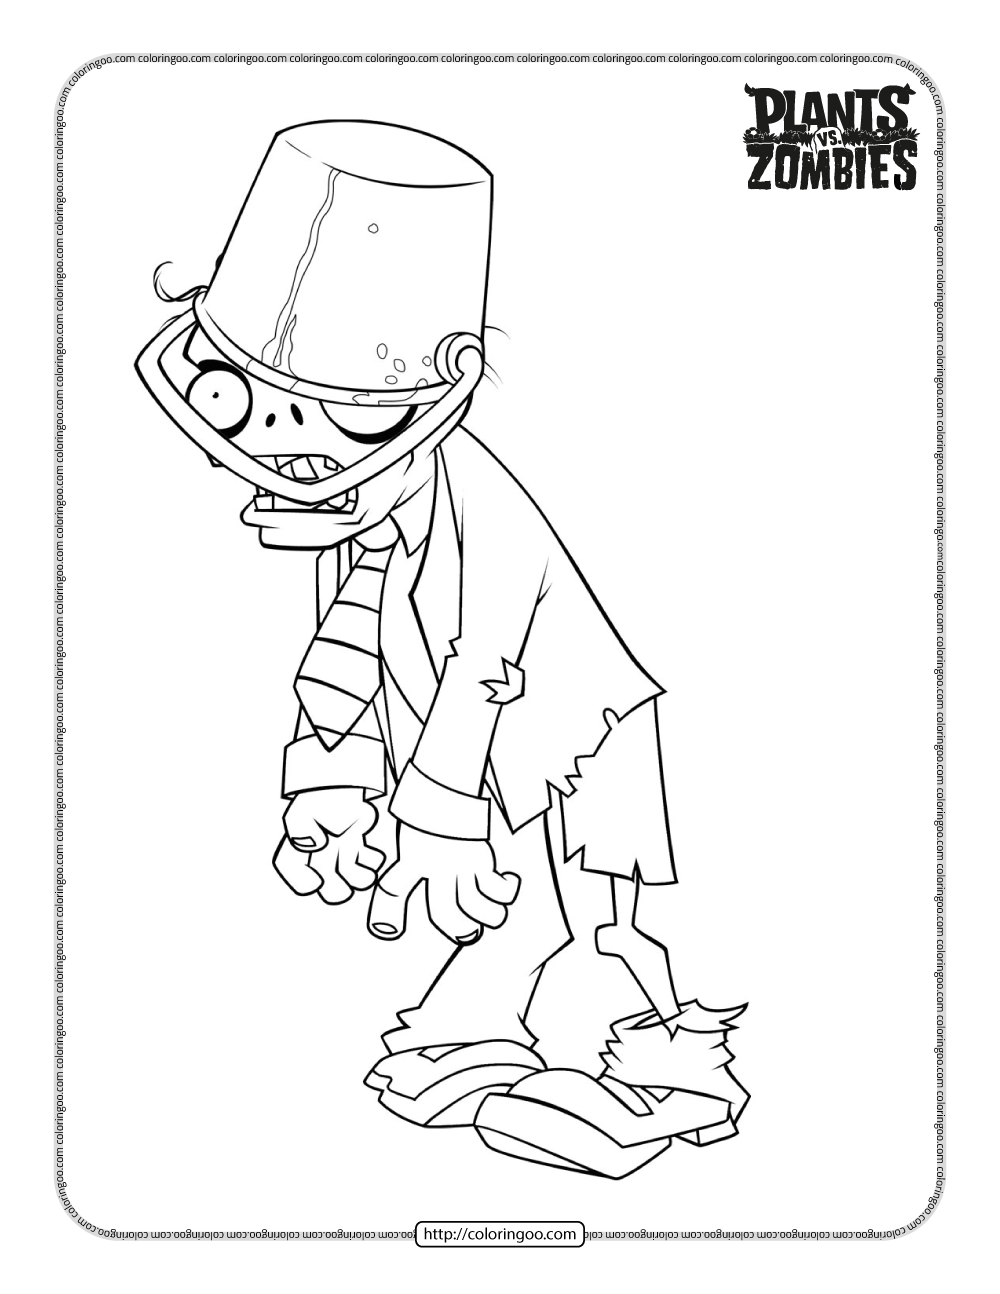 plants vs zombies buckethead zombie coloring pages